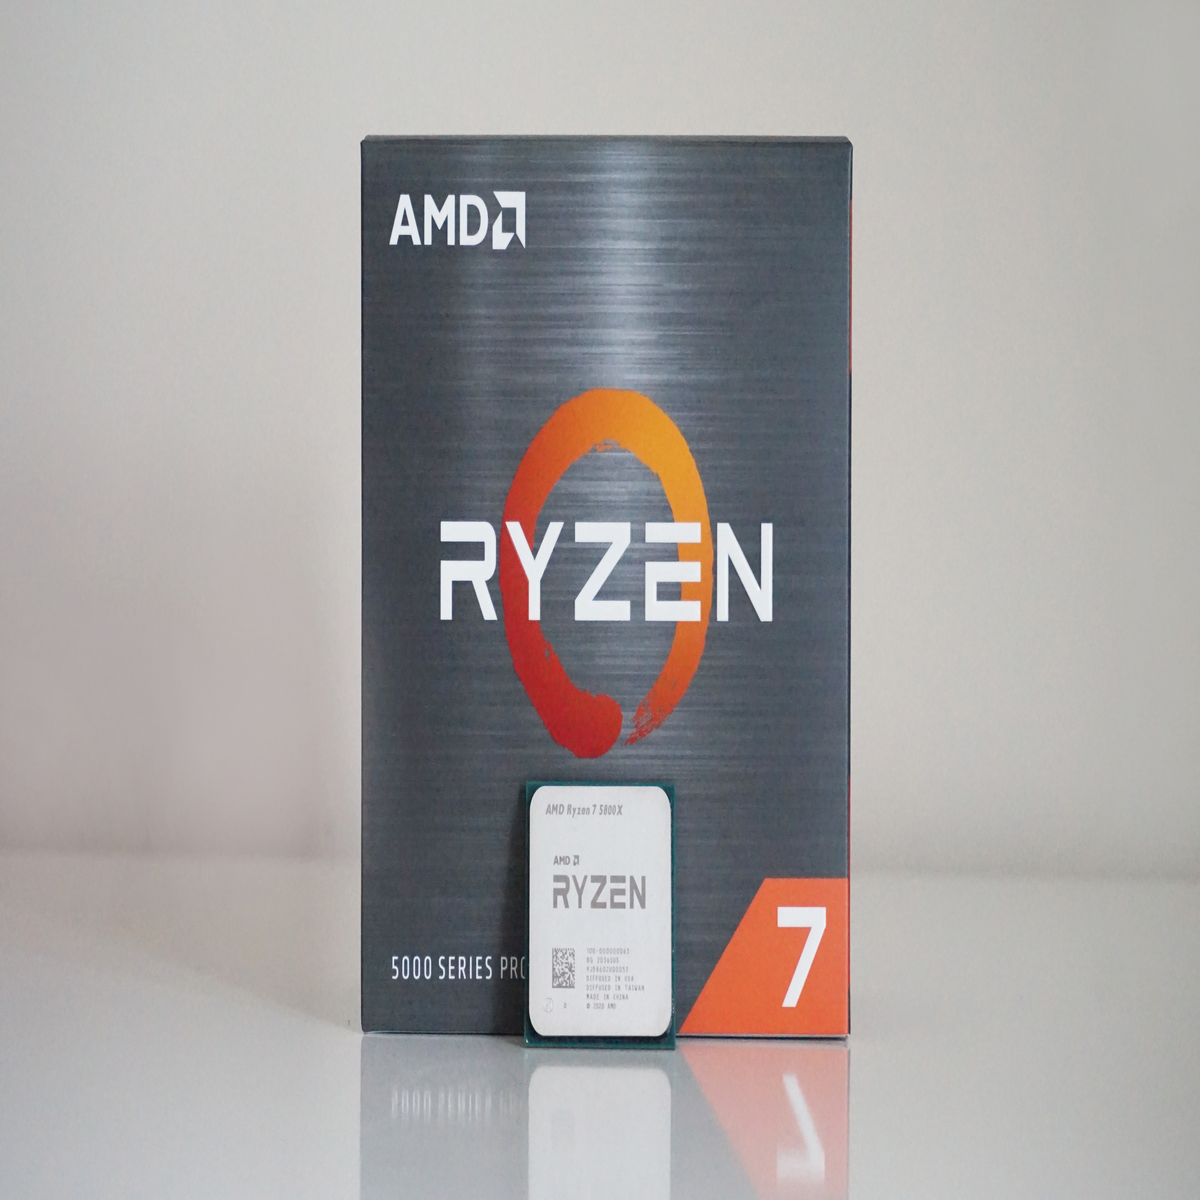 AMD Ryzen 7 5700X Review - Finally an Affordable 8-Core - Compression &  Encryption